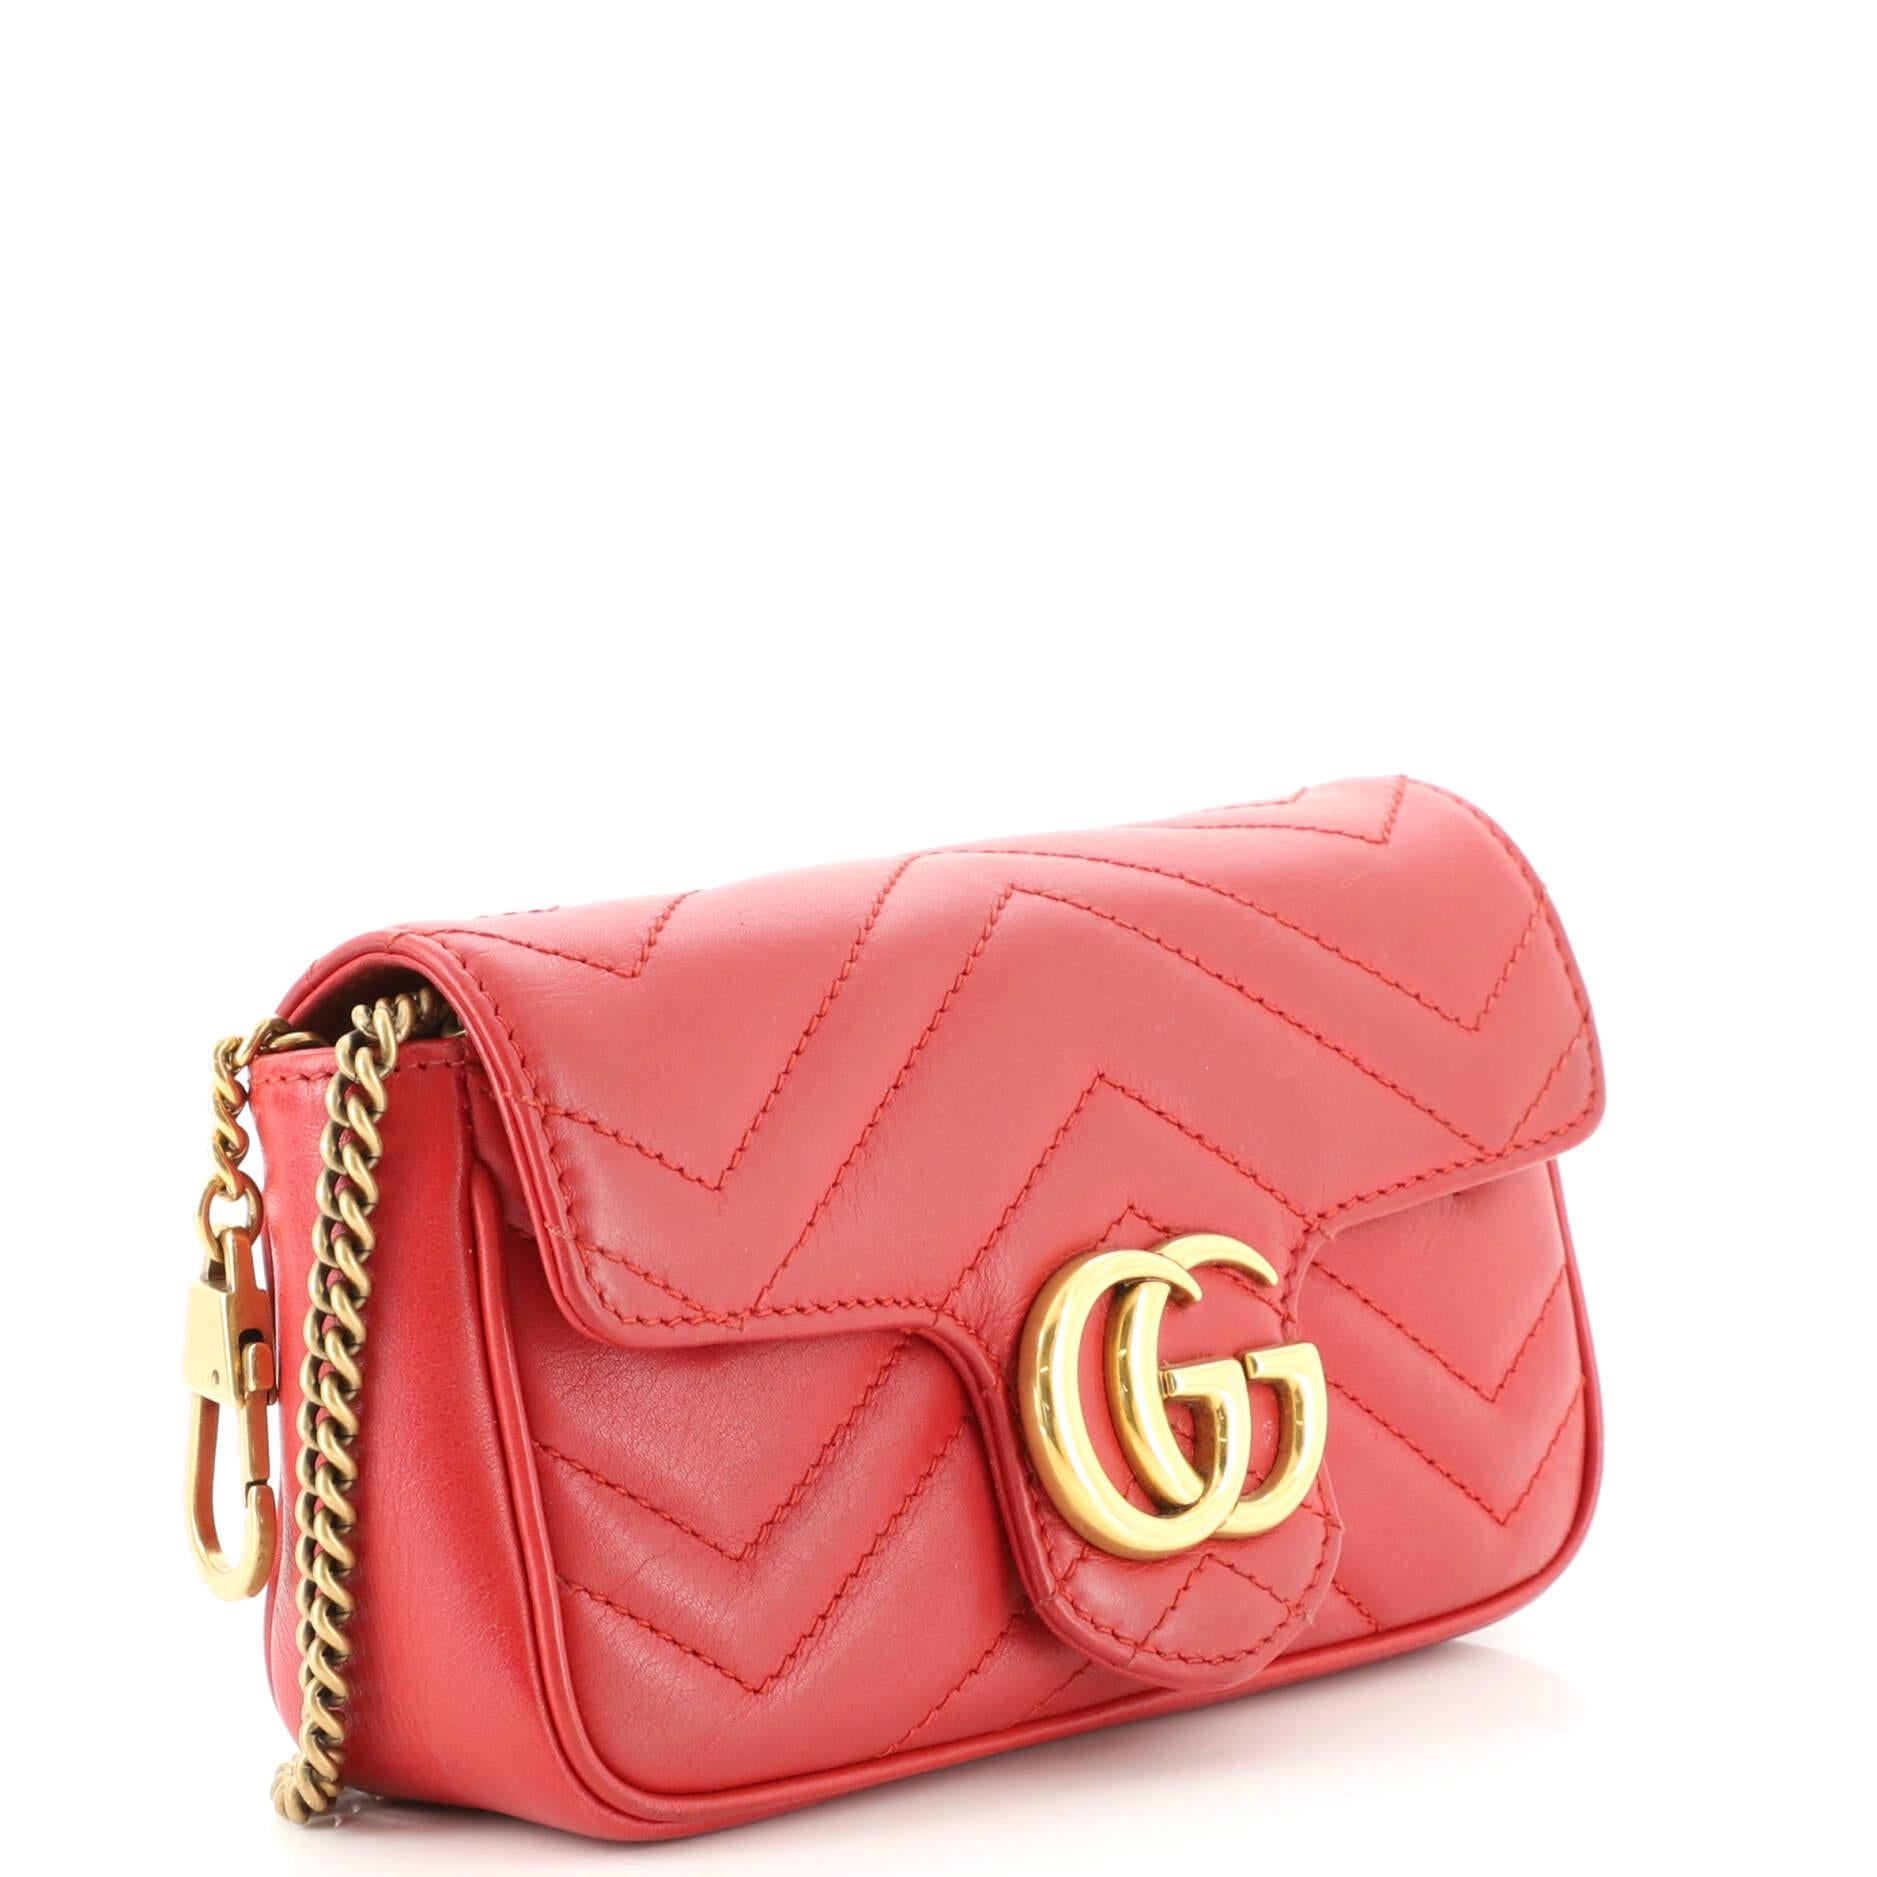 Gucci GG Marmont Flap Bag Matelasse Leather Super Mini In Good Condition For Sale In NY, NY